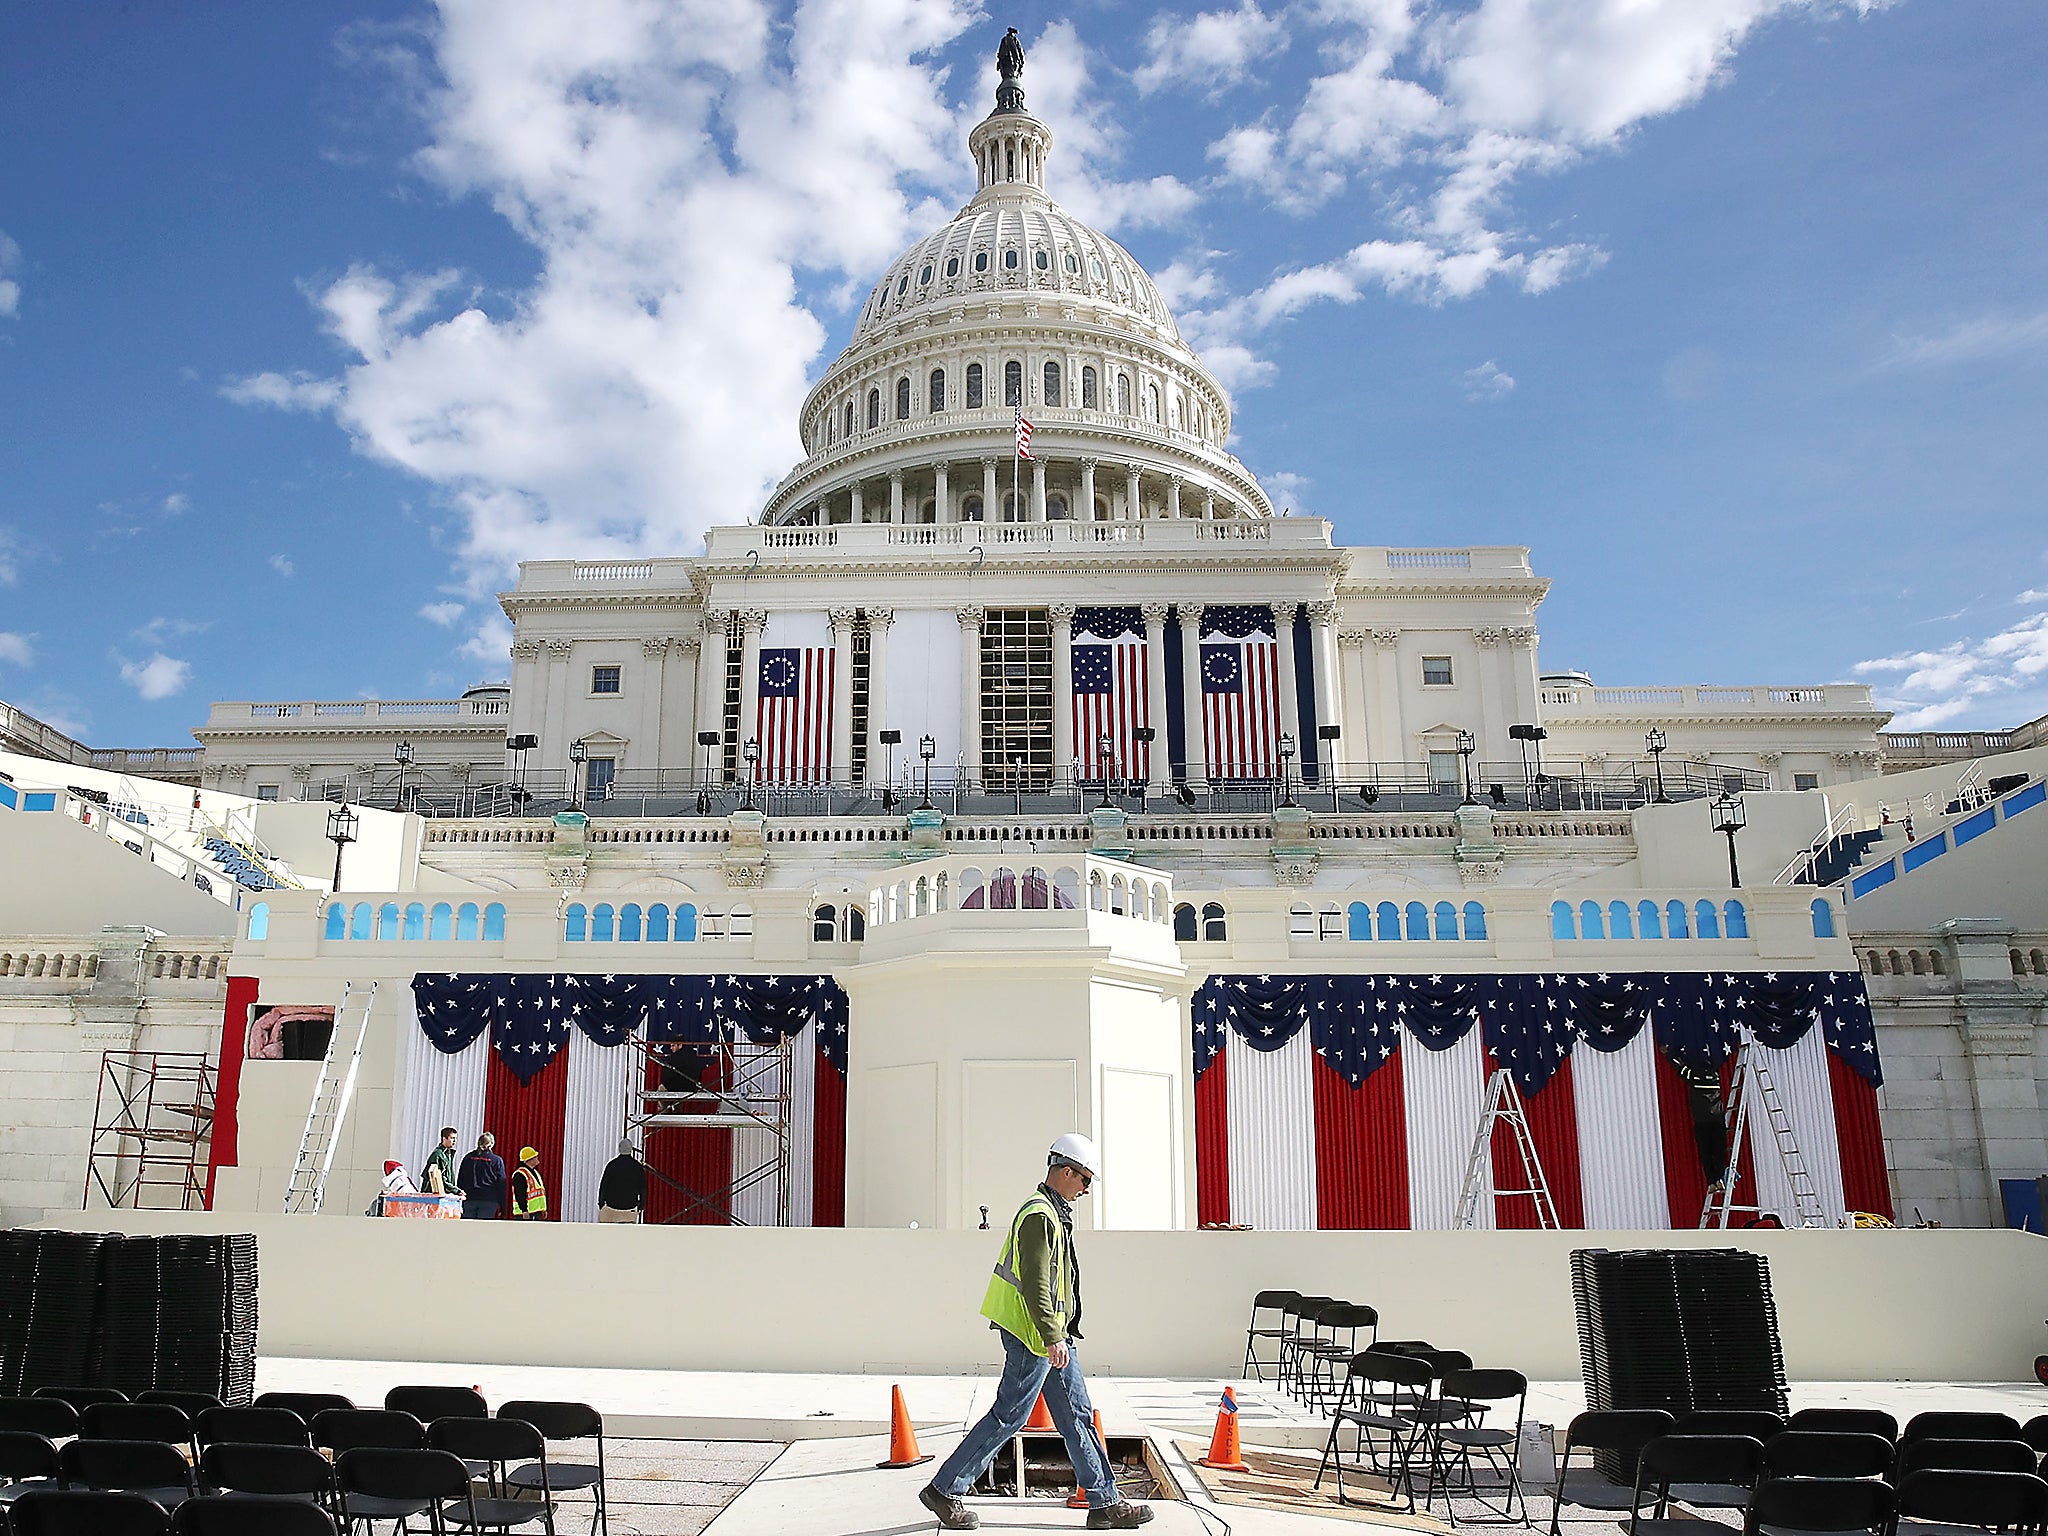 The stage is prepared ahead of the presidential inauguration at the US Capitol in Washington DC